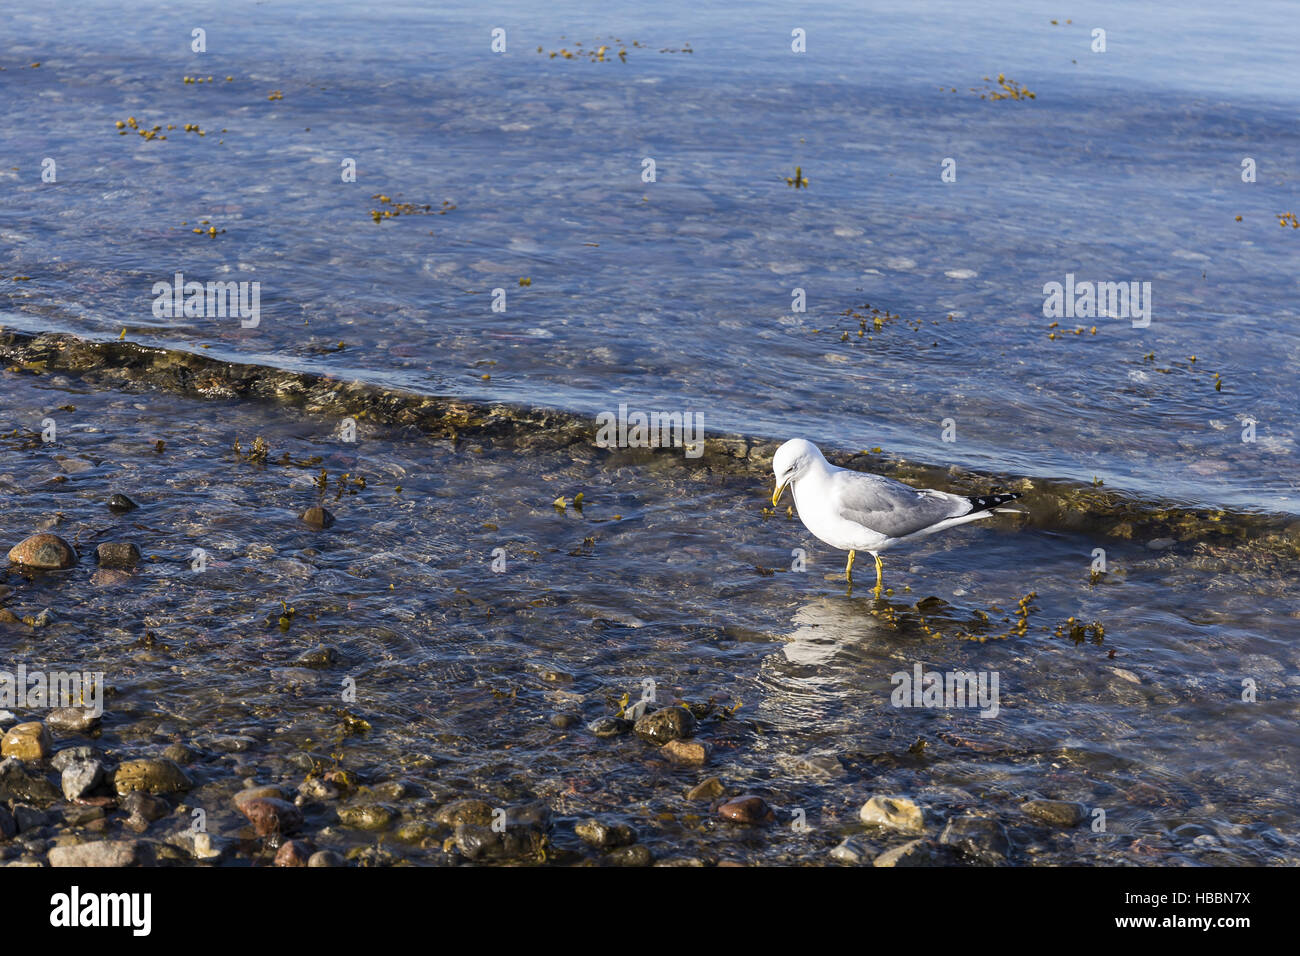 A seagull standing in water Stock Photo